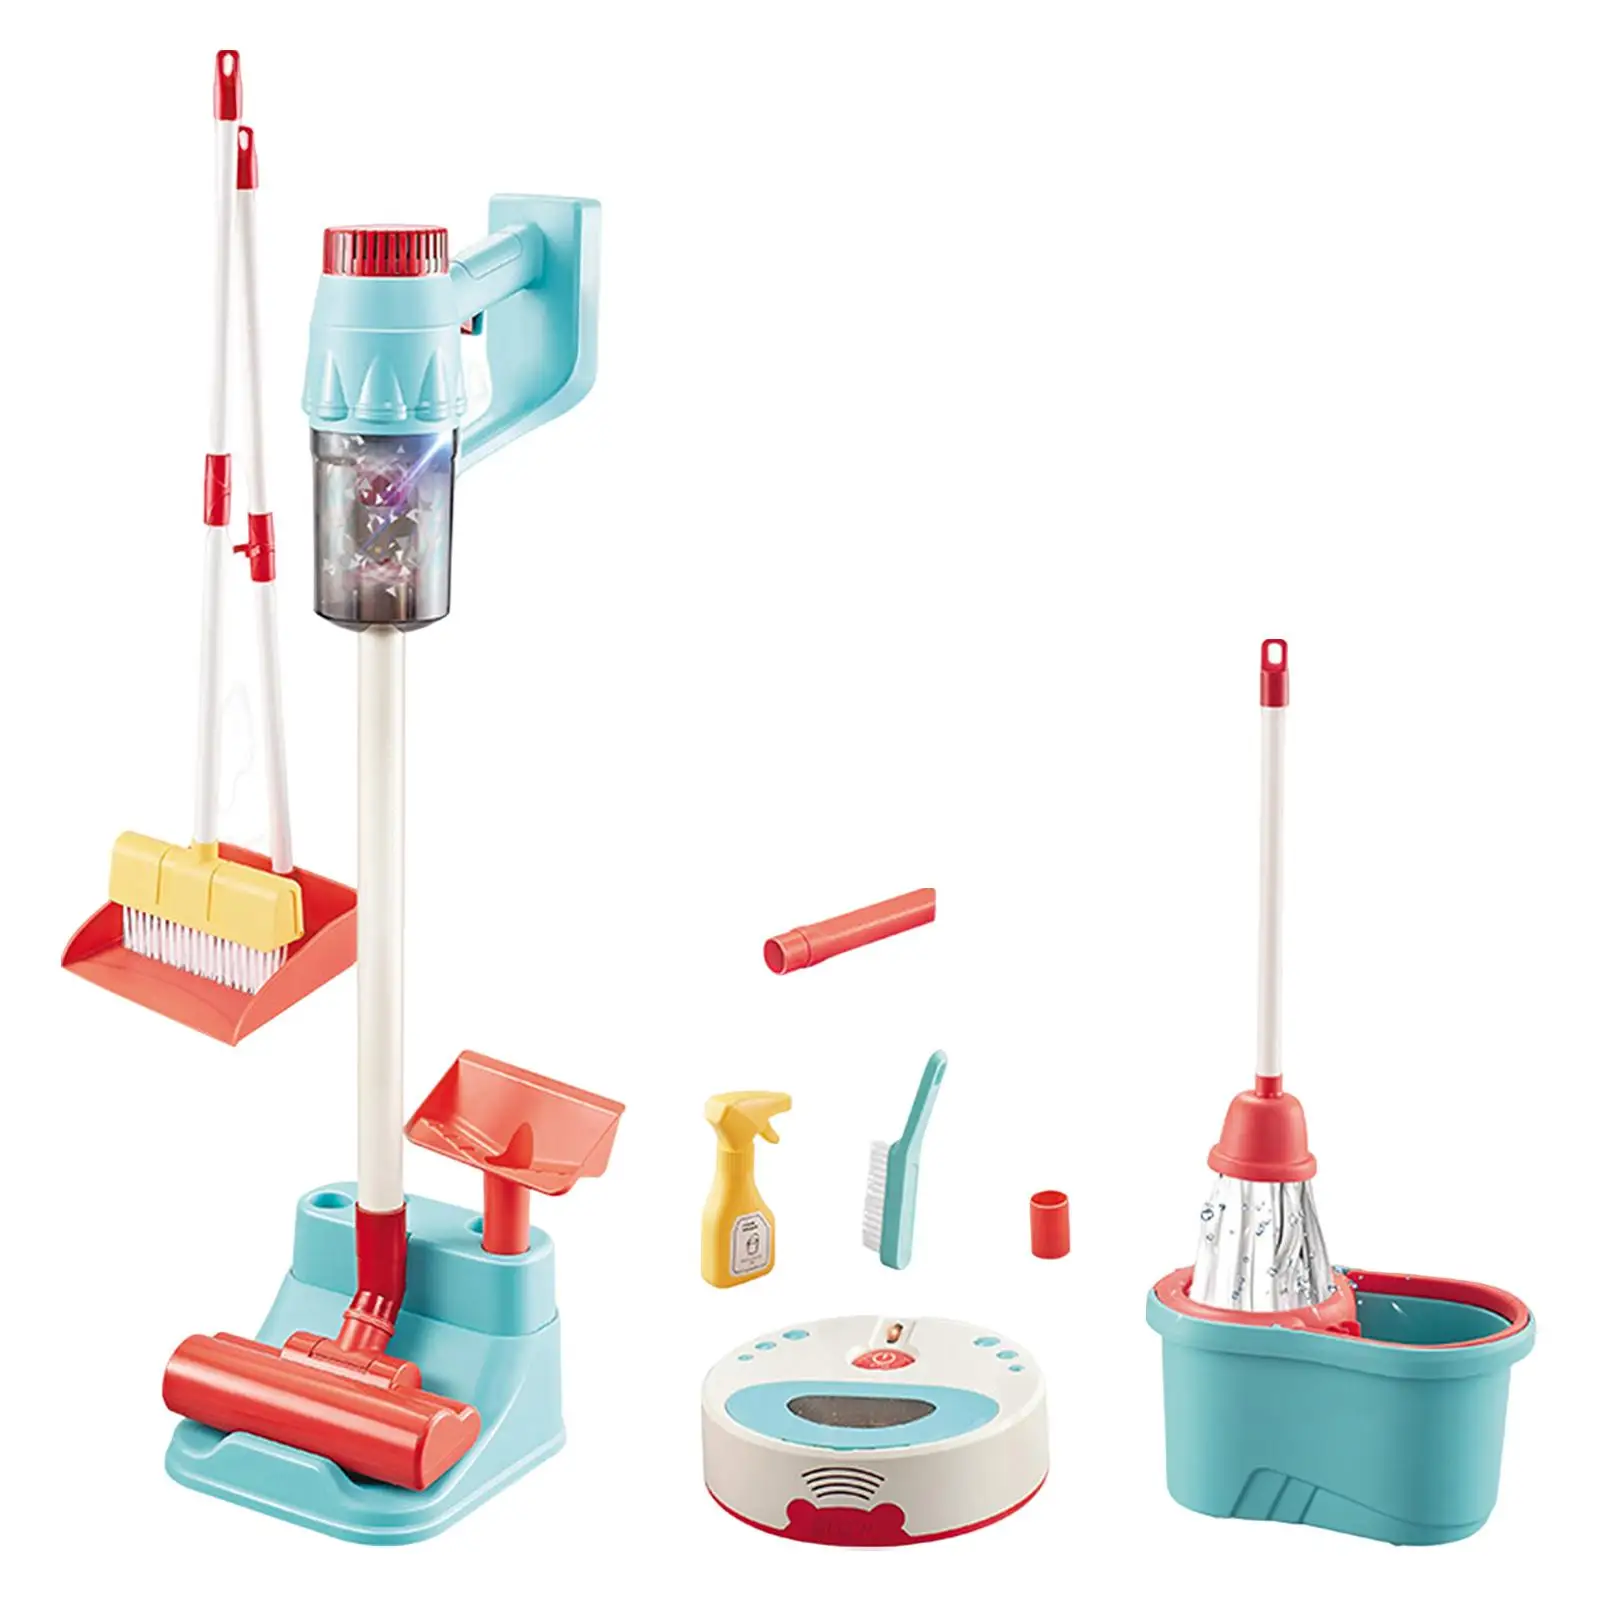 Kids Cleaning Tools Set Toy Pretend Play House Cleaning Tools Developmental Toy Role Play Game for Toddlers Kids Girls Gifts